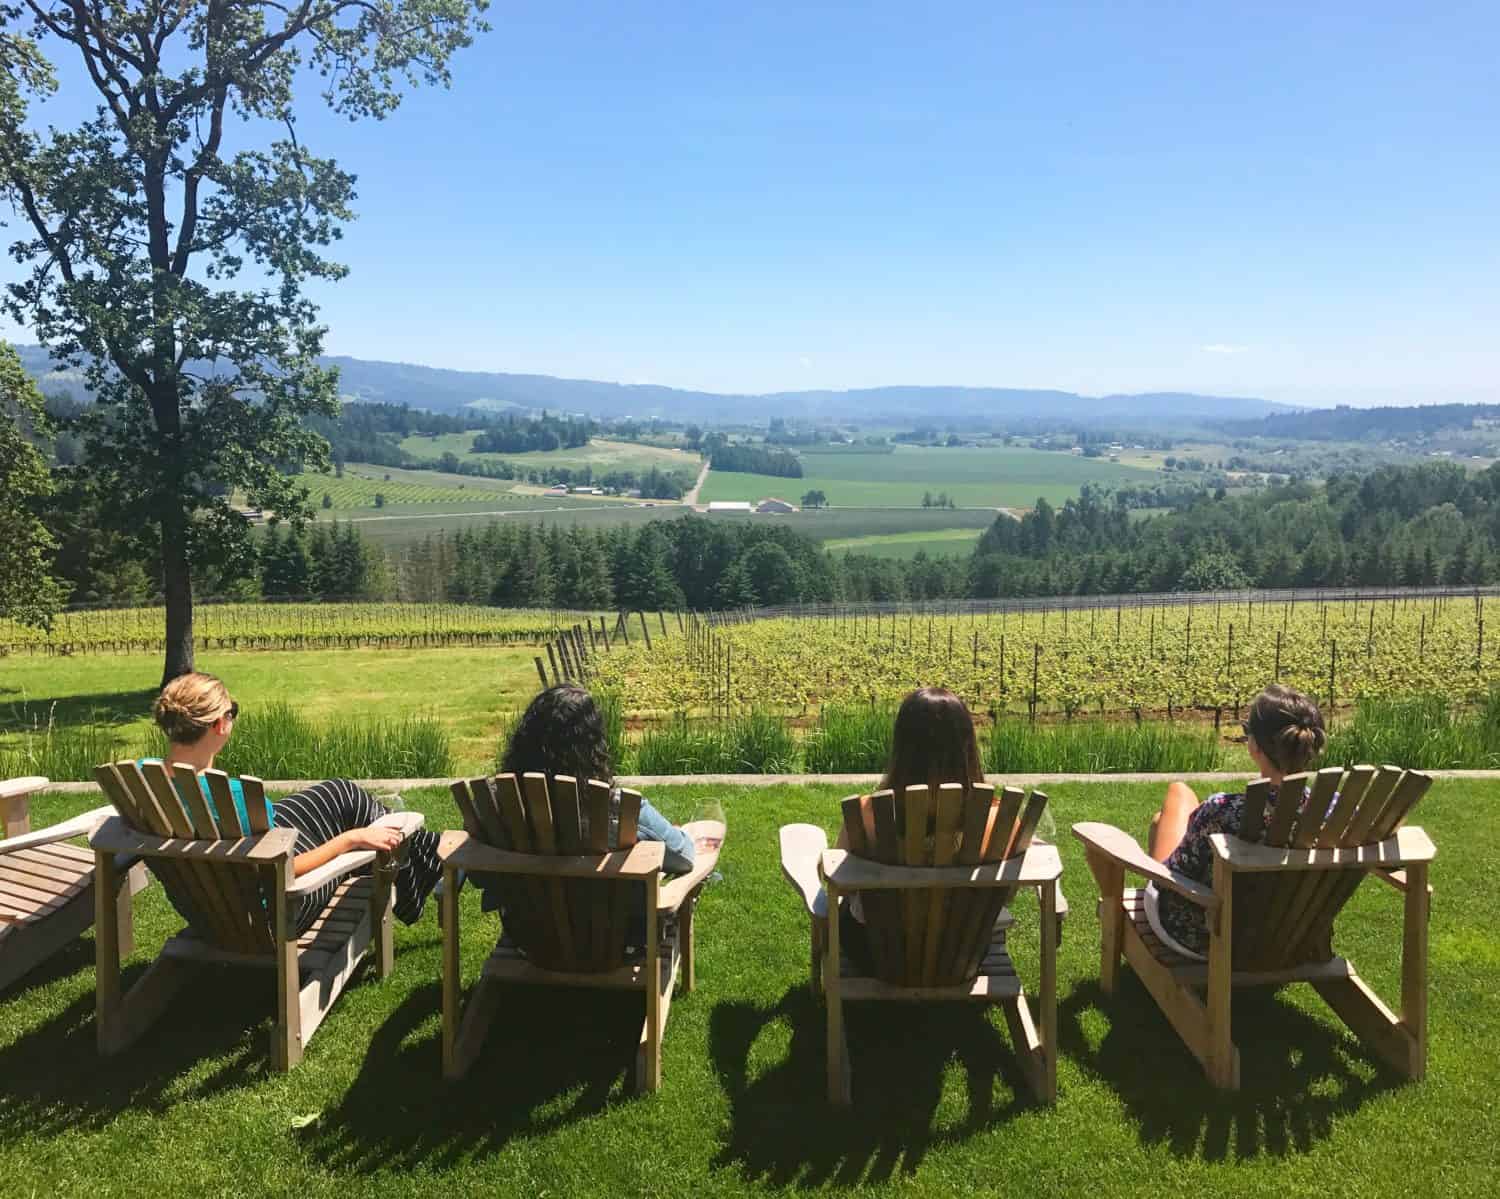 Penner-Ash Vineyard in the Willamette Valley, where to eat, how to plan your trip | Everything you need to know for a visit to the Willamette Valley, Portland itinerary, wine weekend in Oregon, the perfect girls' trip #willamette #wineries #oregon